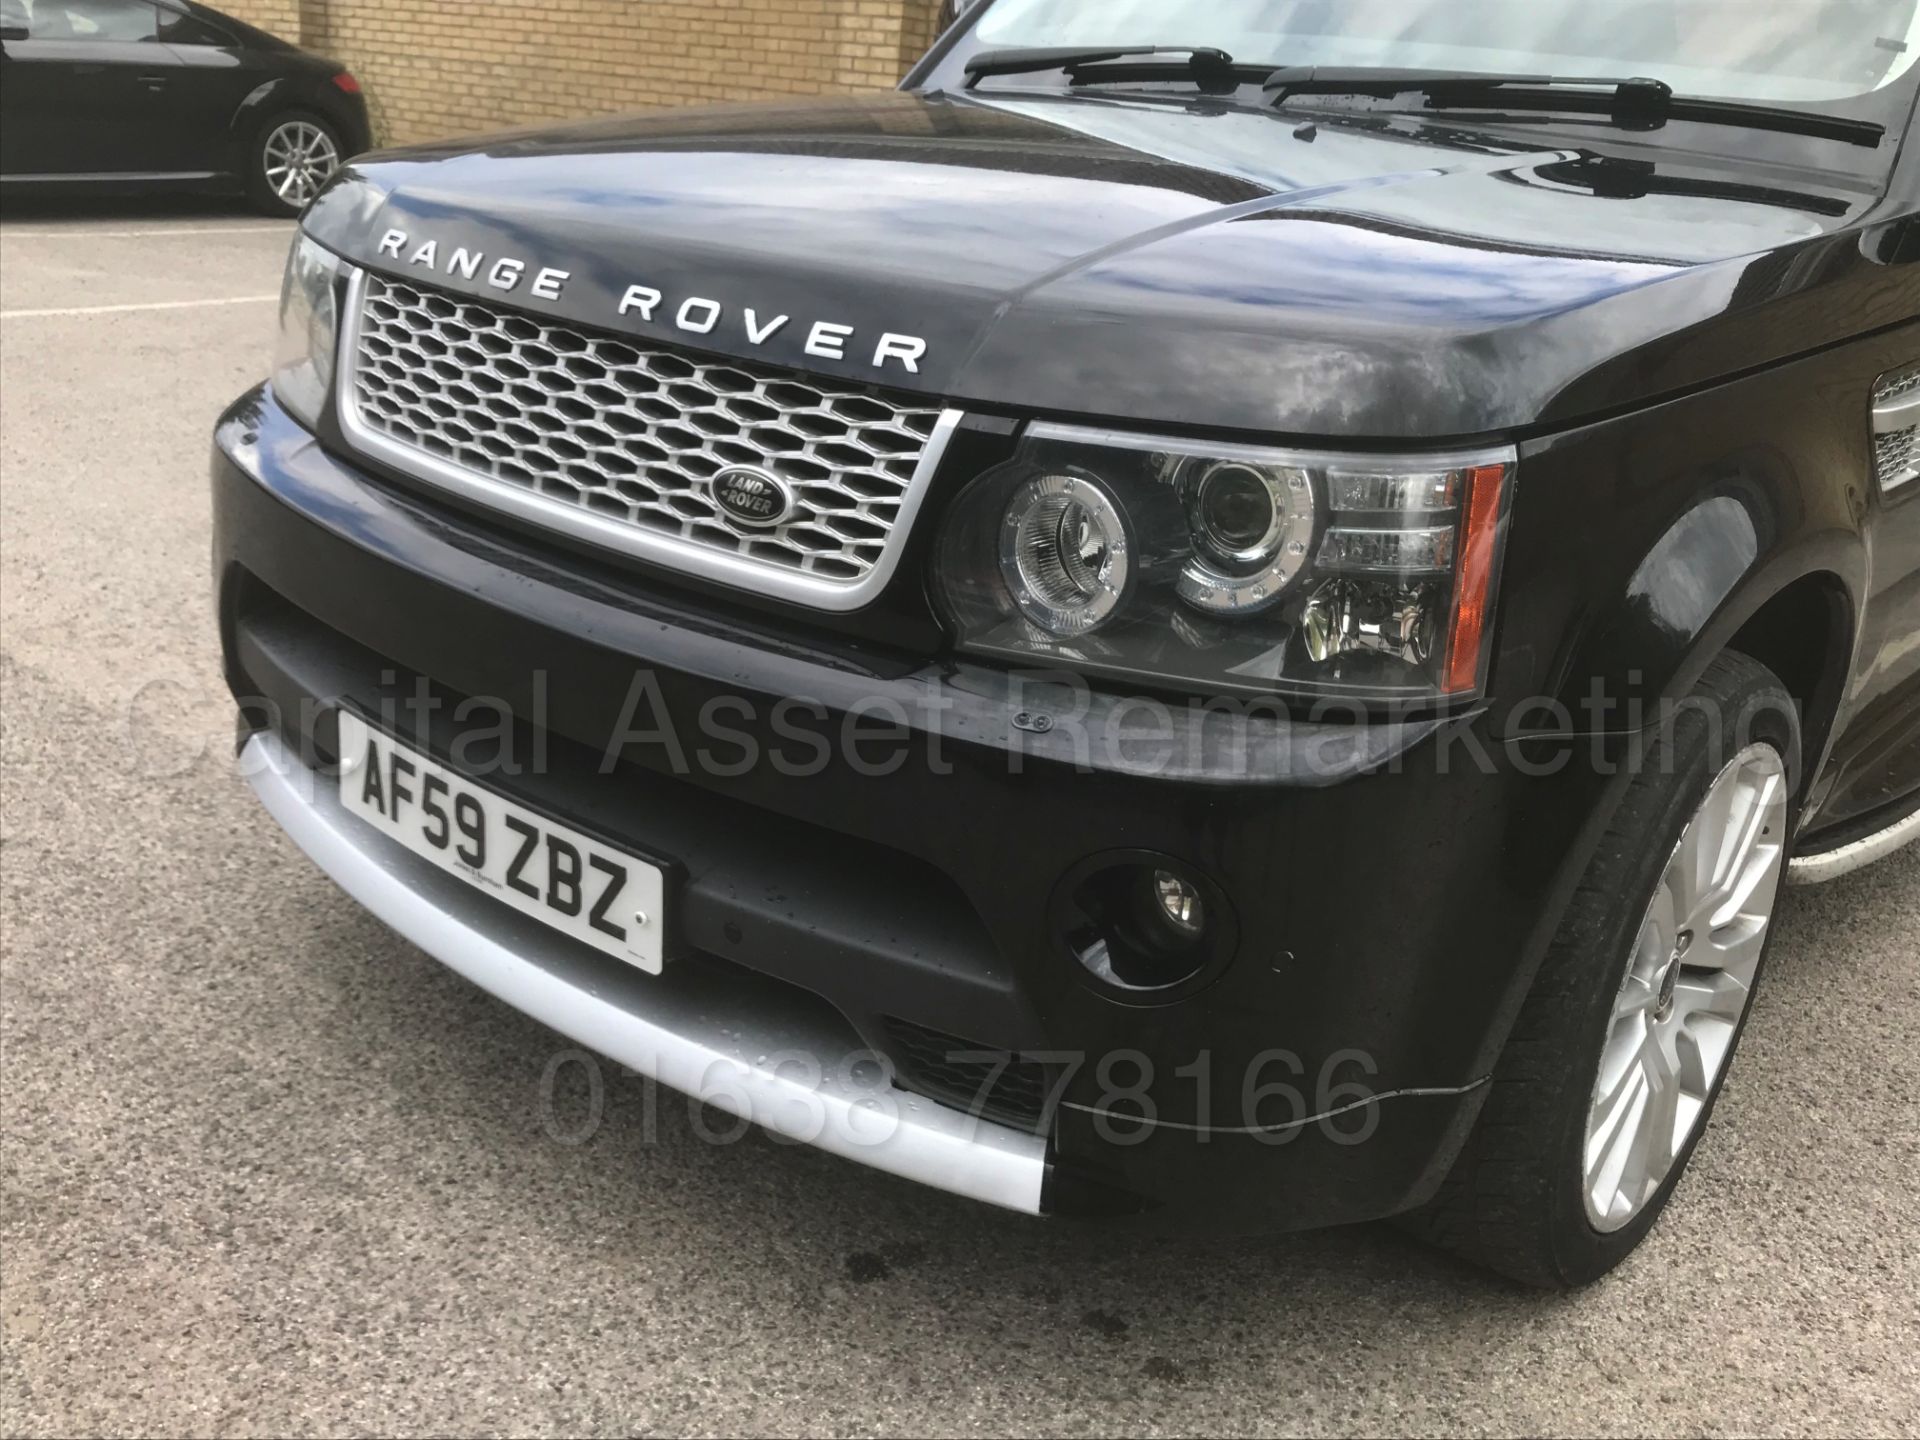 (On Sale) RANGE ROVER SPORT *HSE EDITION* (2010 MODEL) '3.0 TDV6 - 245 BHP - AUTO' **FULLY LOADED** - Image 14 of 44